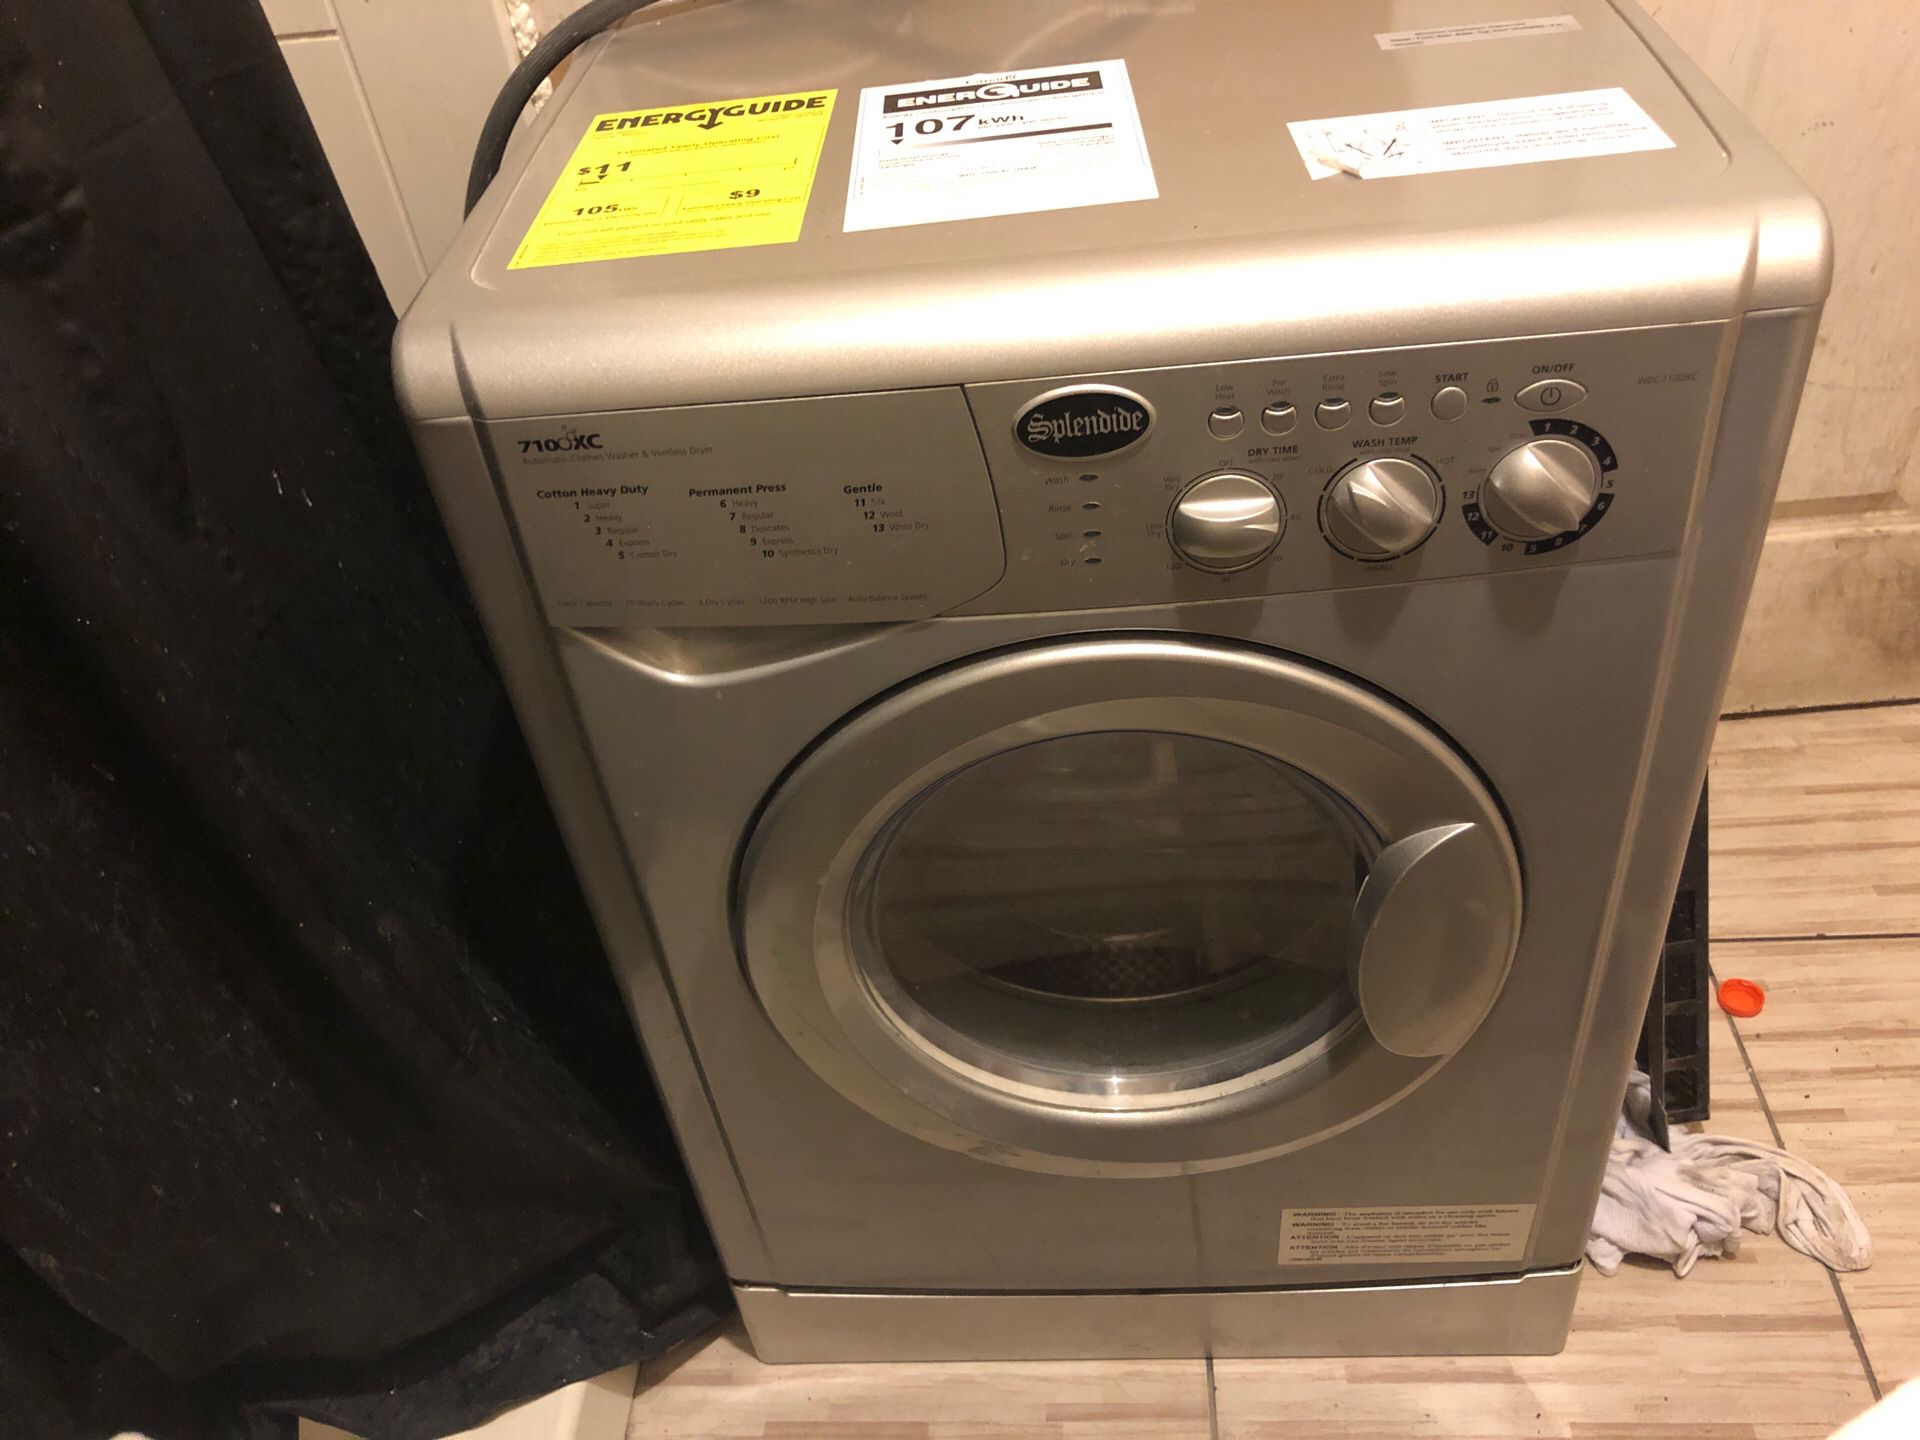 New washer and dreyer in one